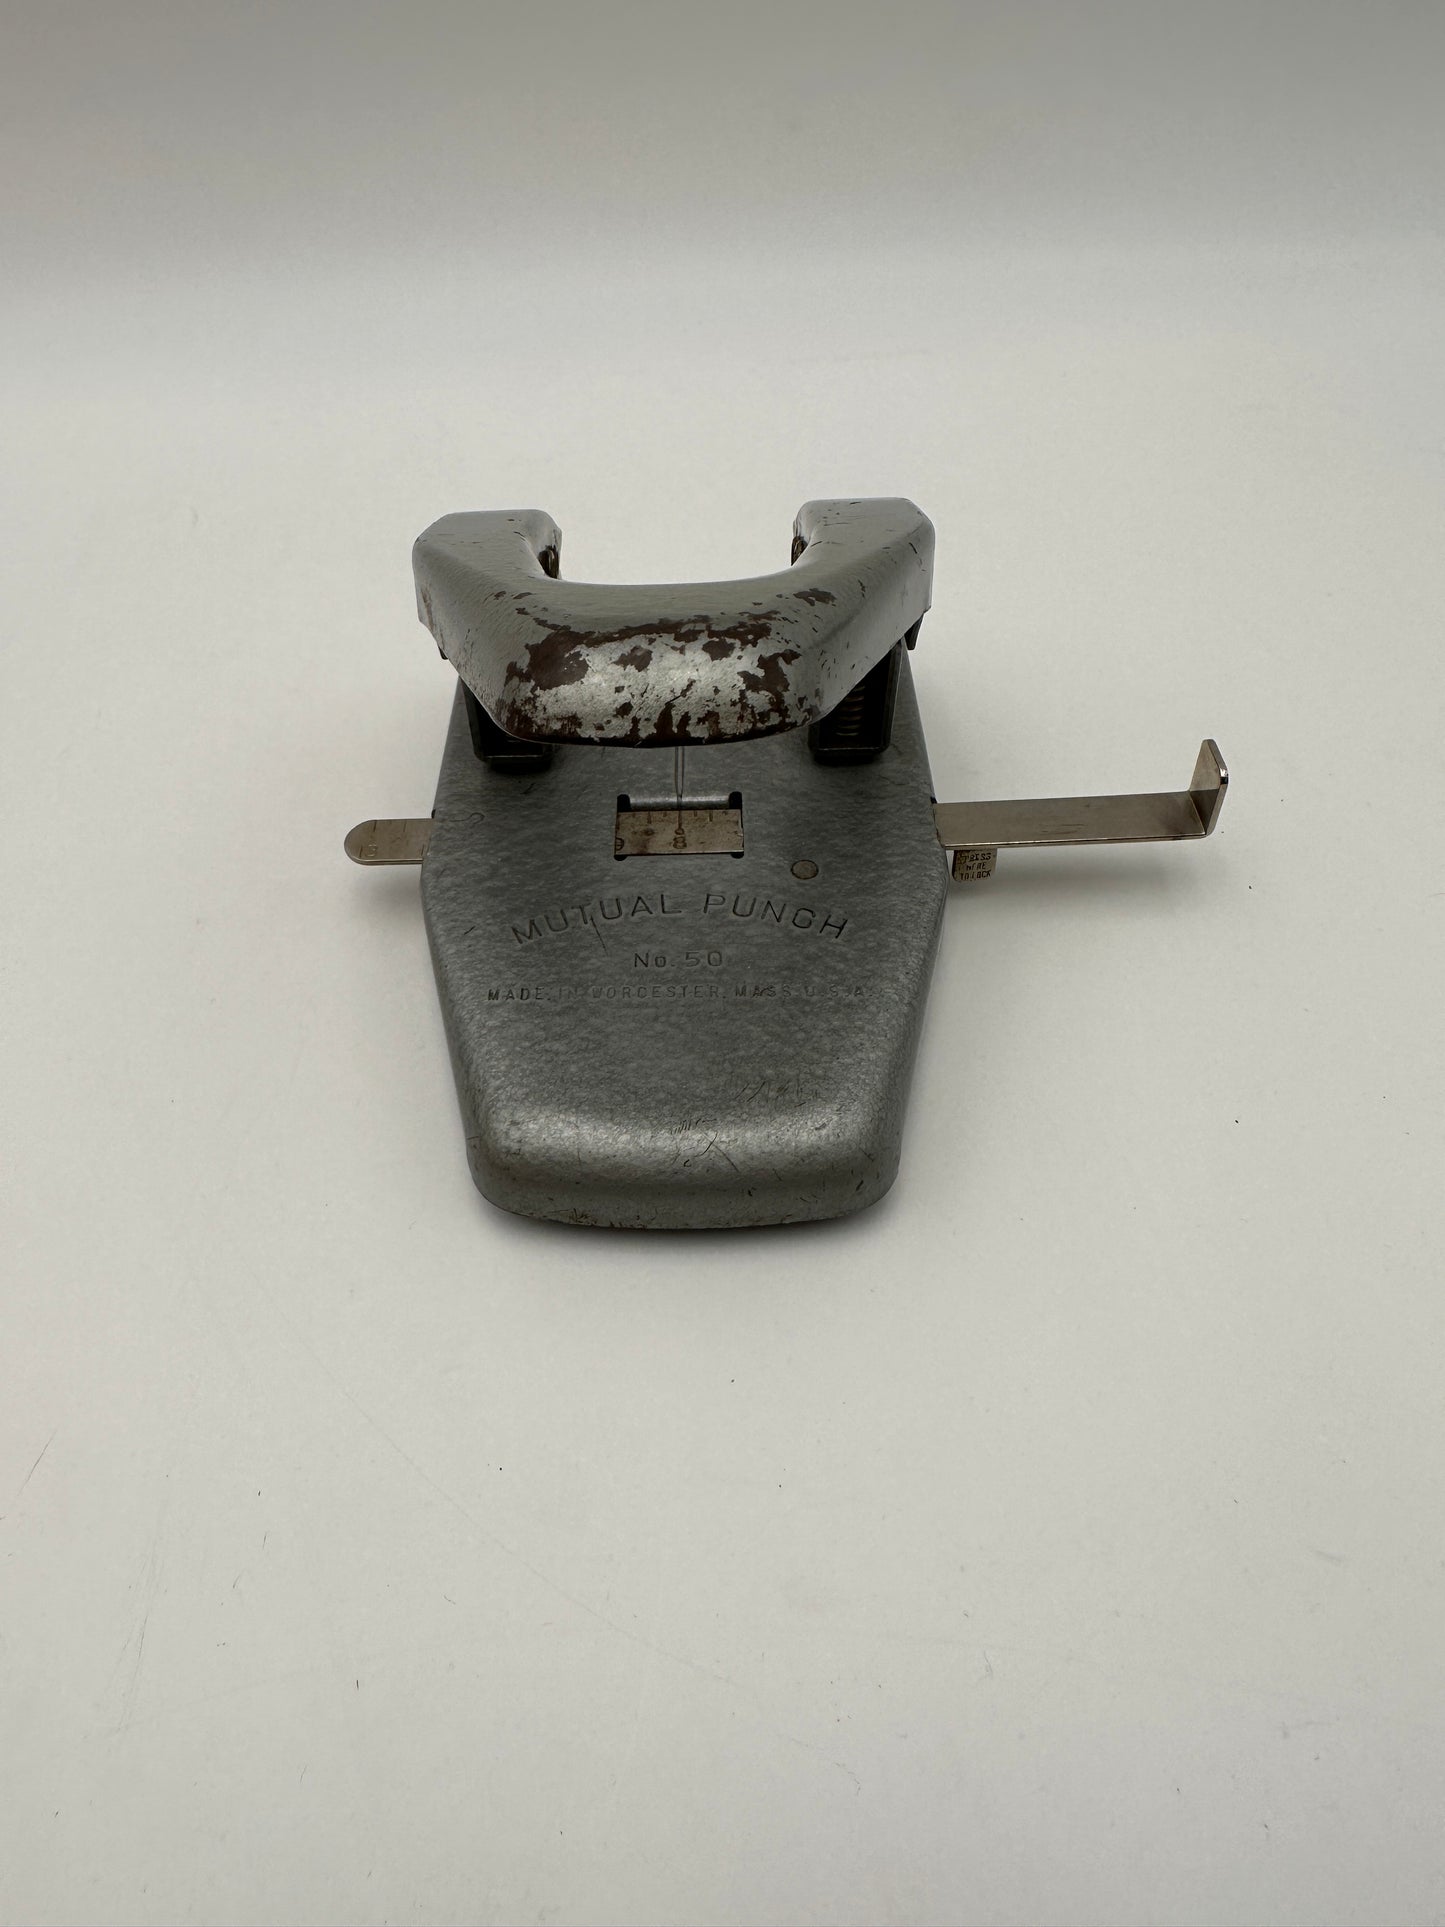 Mutual No. 50 Centering Guide Vintage Two-Hole Punch